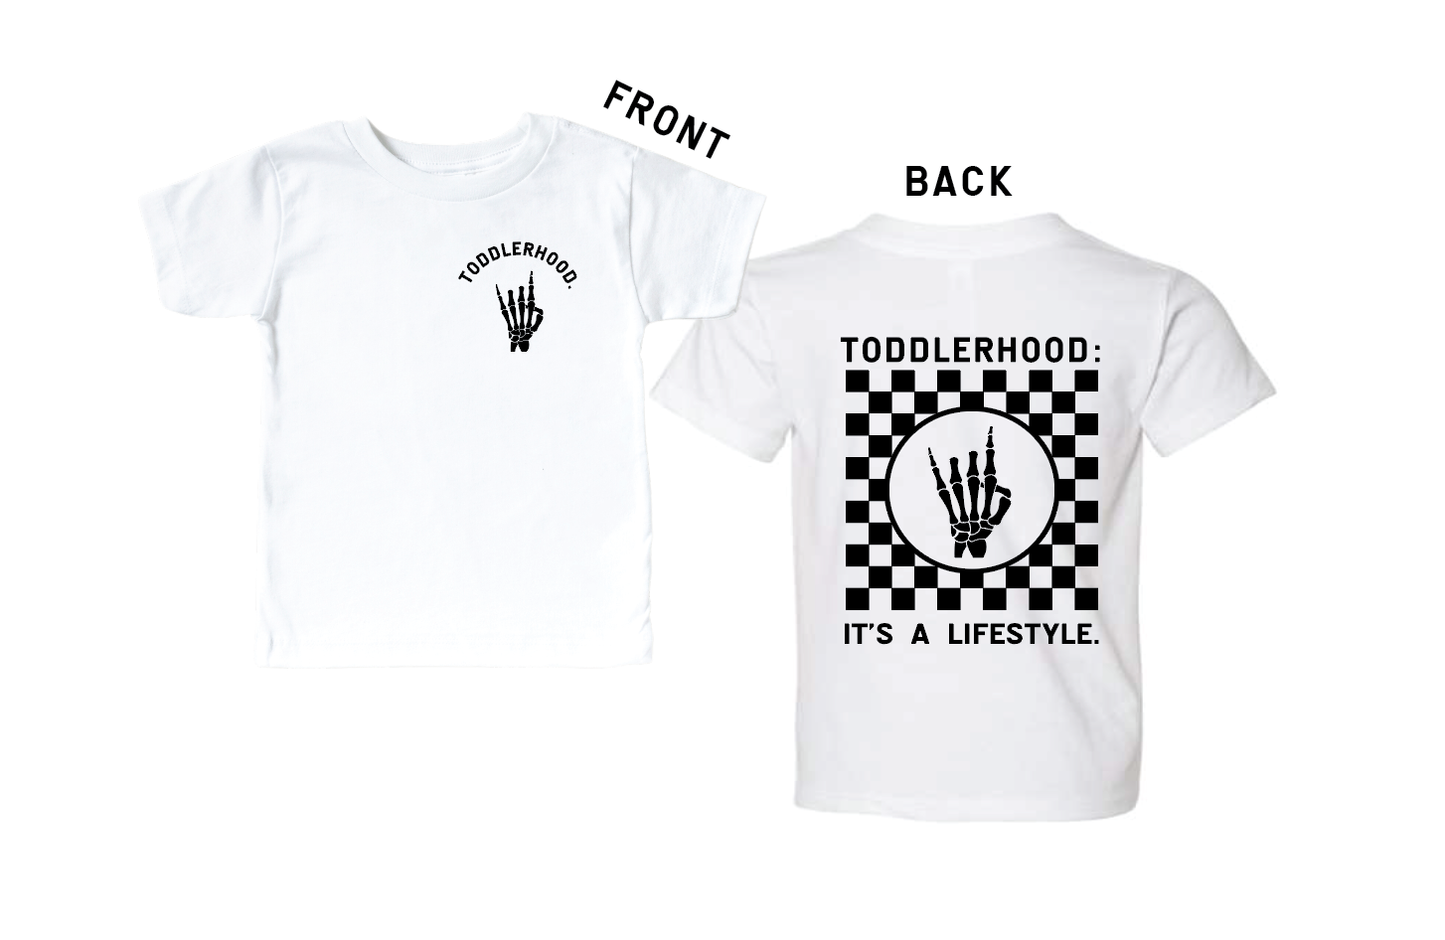 Toddlerhood - "It's a Lifestyle" Kids Tee - Front + Back: Black / 3T